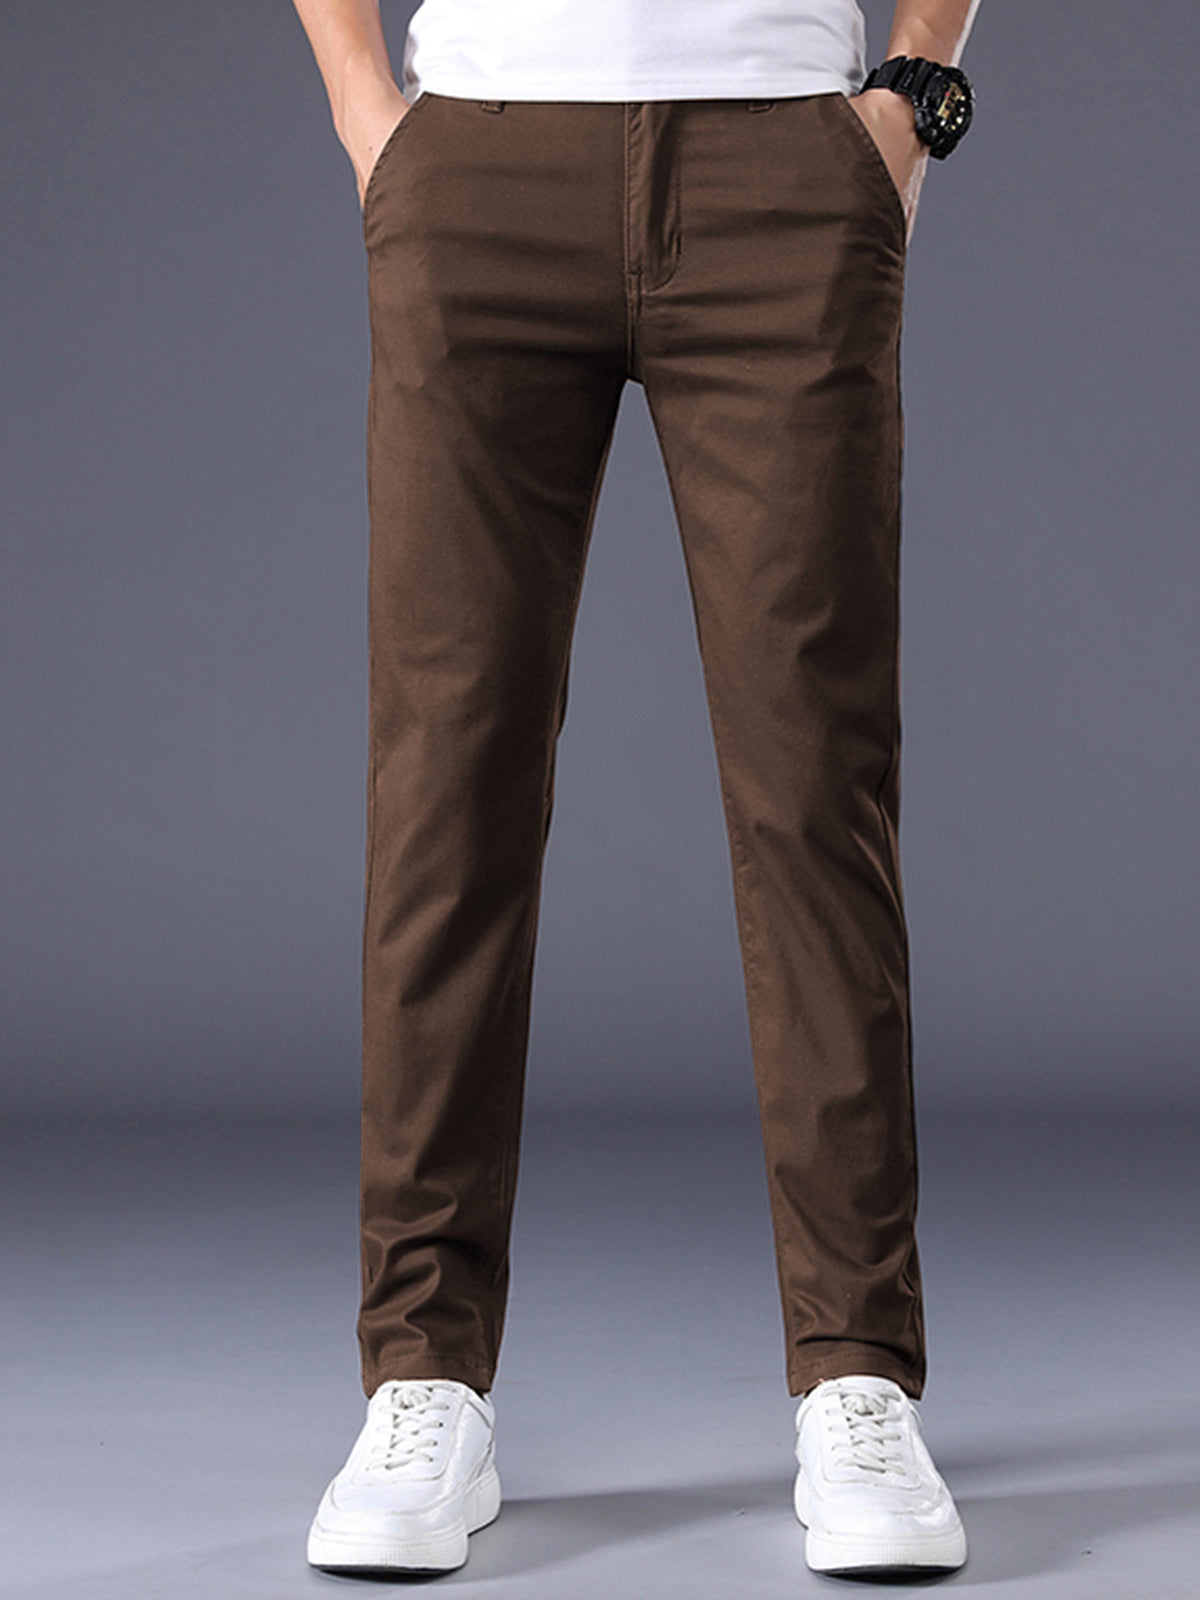 Turbo Slim fit Plain Cotton Pant In Coffee